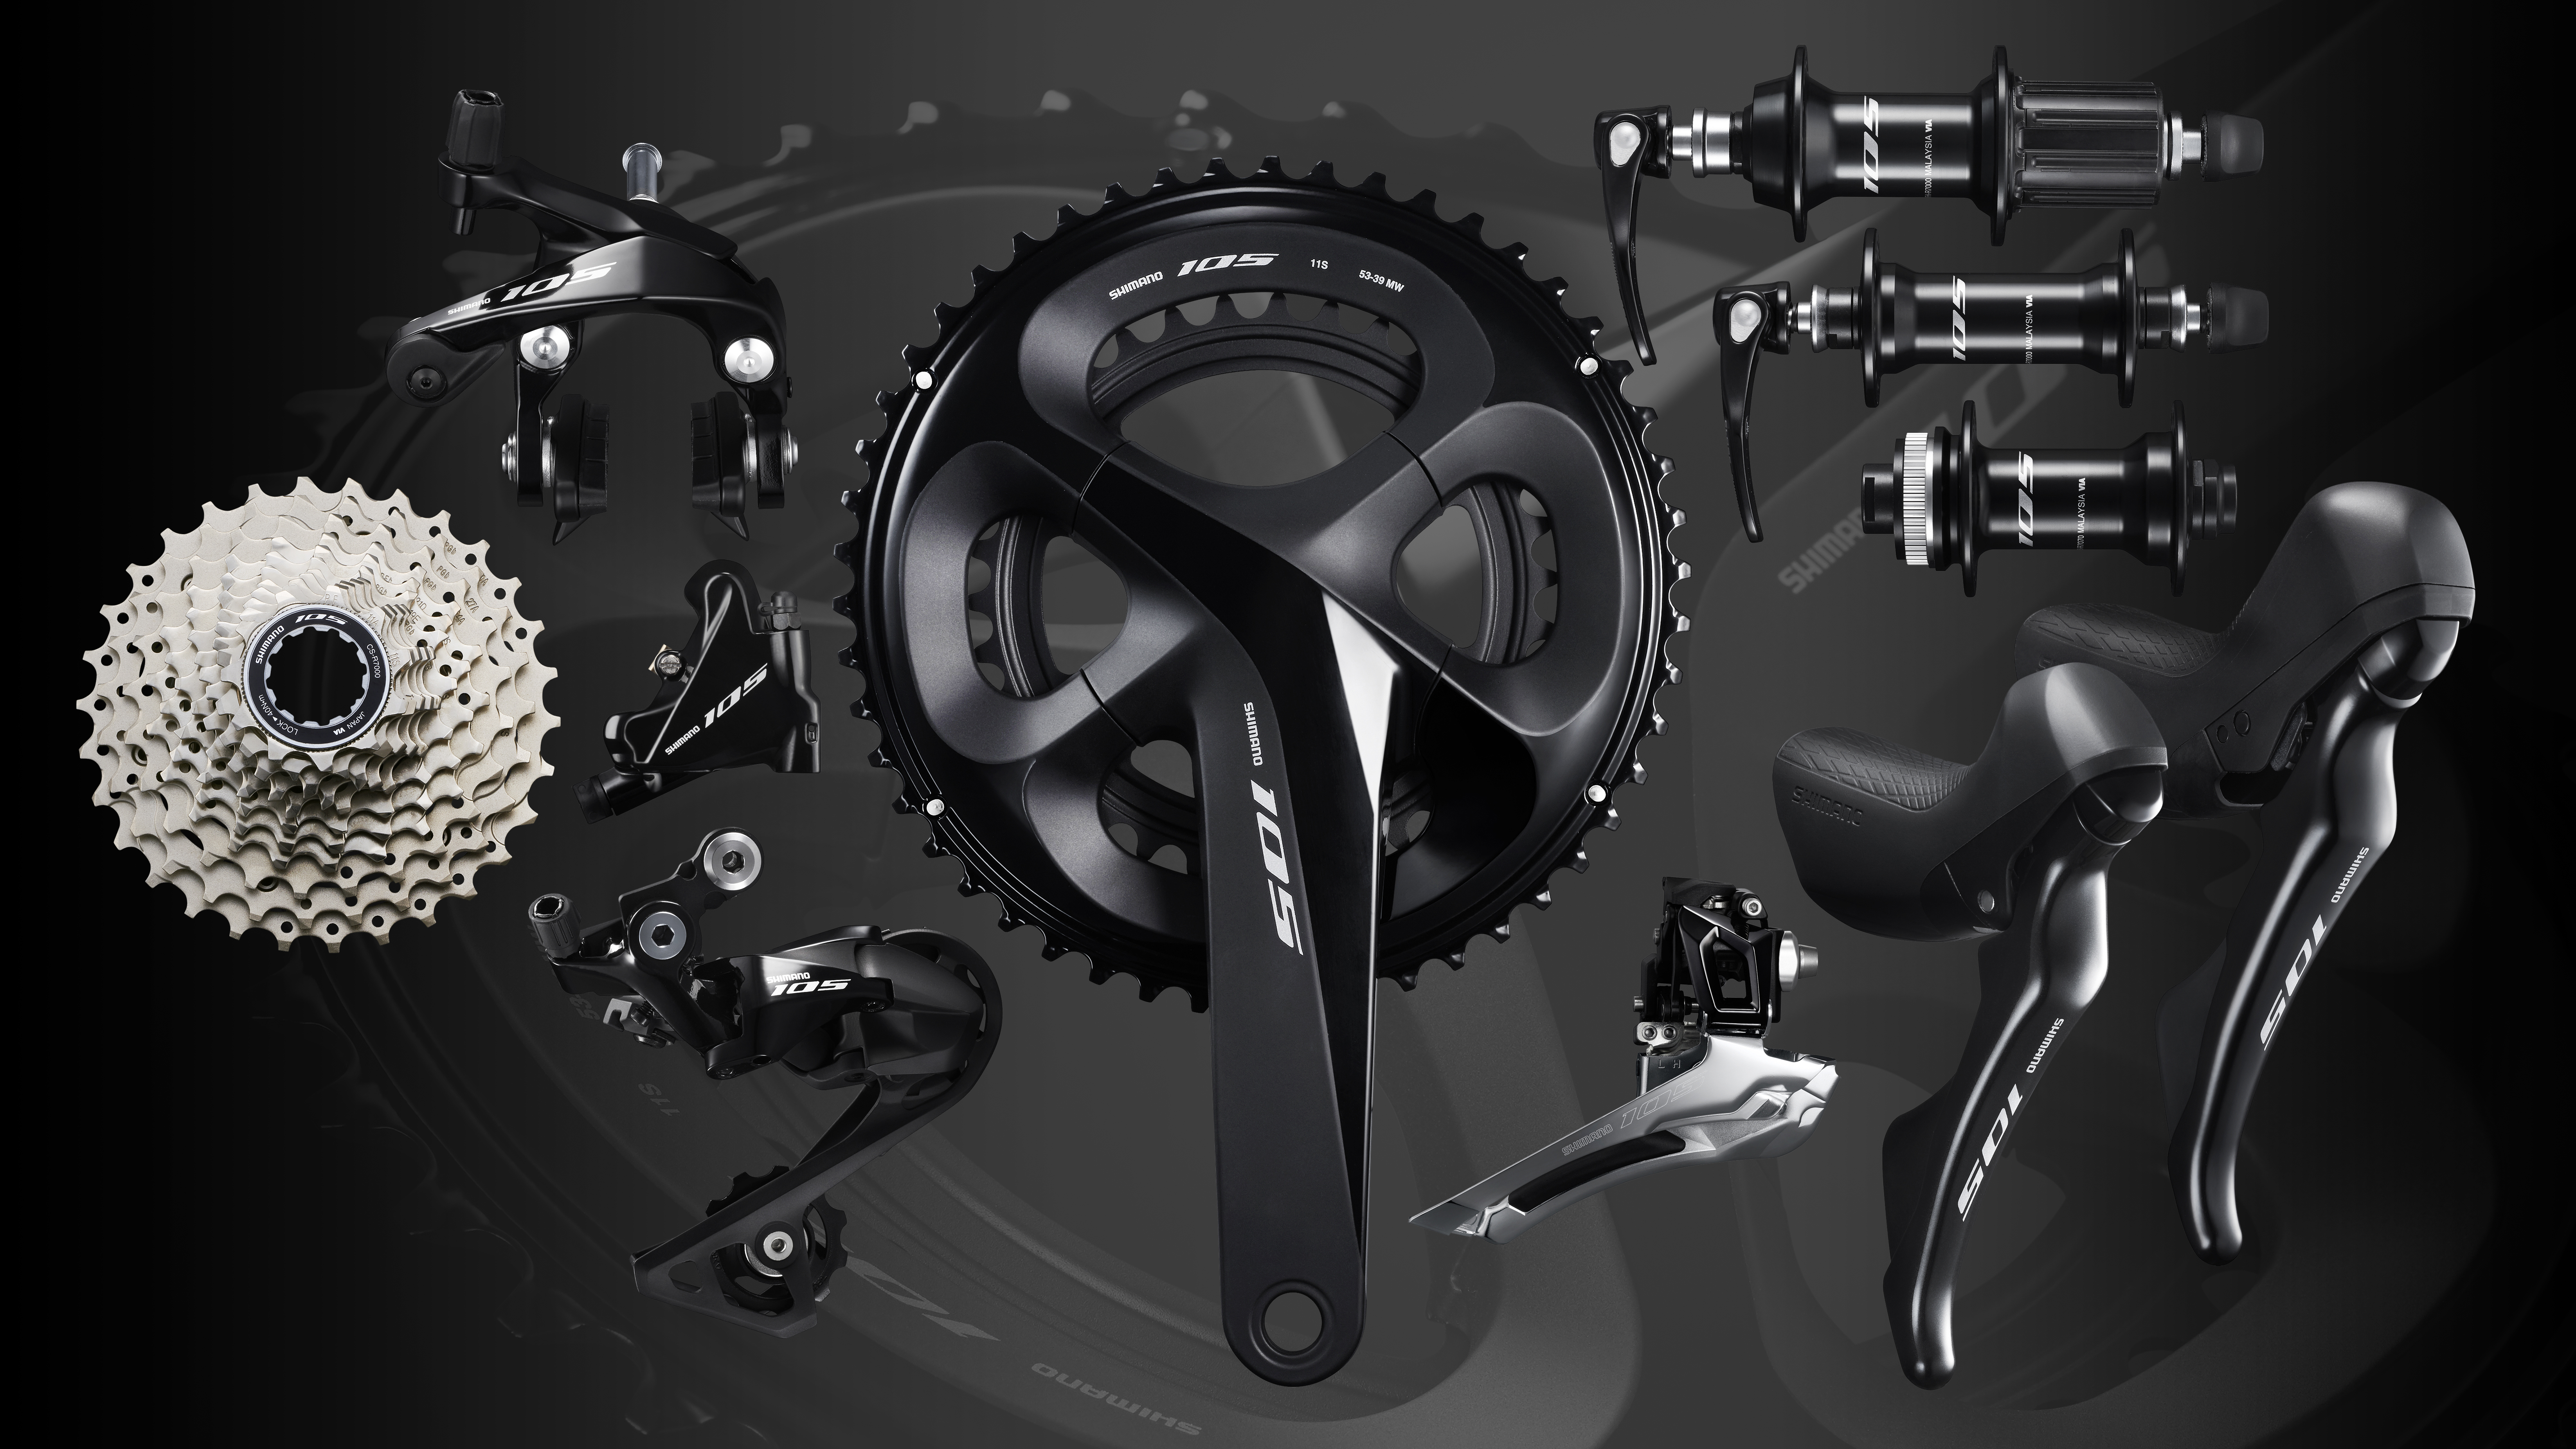 Shimano Announces Updated 105 Group With Hydraulic Disc Brakes And New Clutch Ultegra Derailleur Bicycle Retailer And Industry News